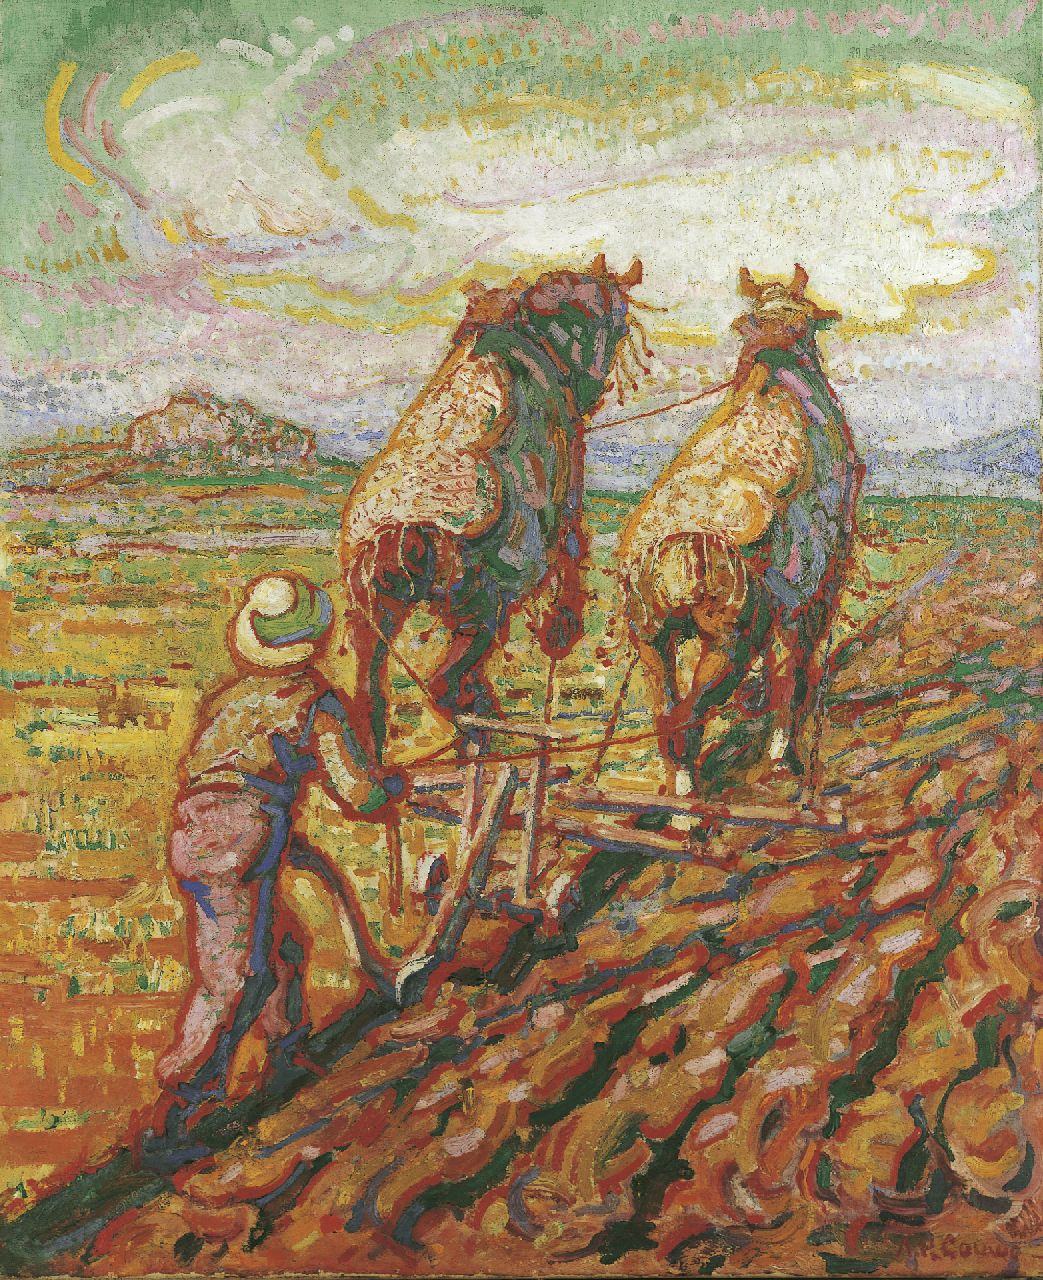 Gouwe A.H.  | Adriaan Herman Gouwe, Ploughing horses, oil on canvas 74.5 x 61.5 cm, signed l.r. and painted circa 1923